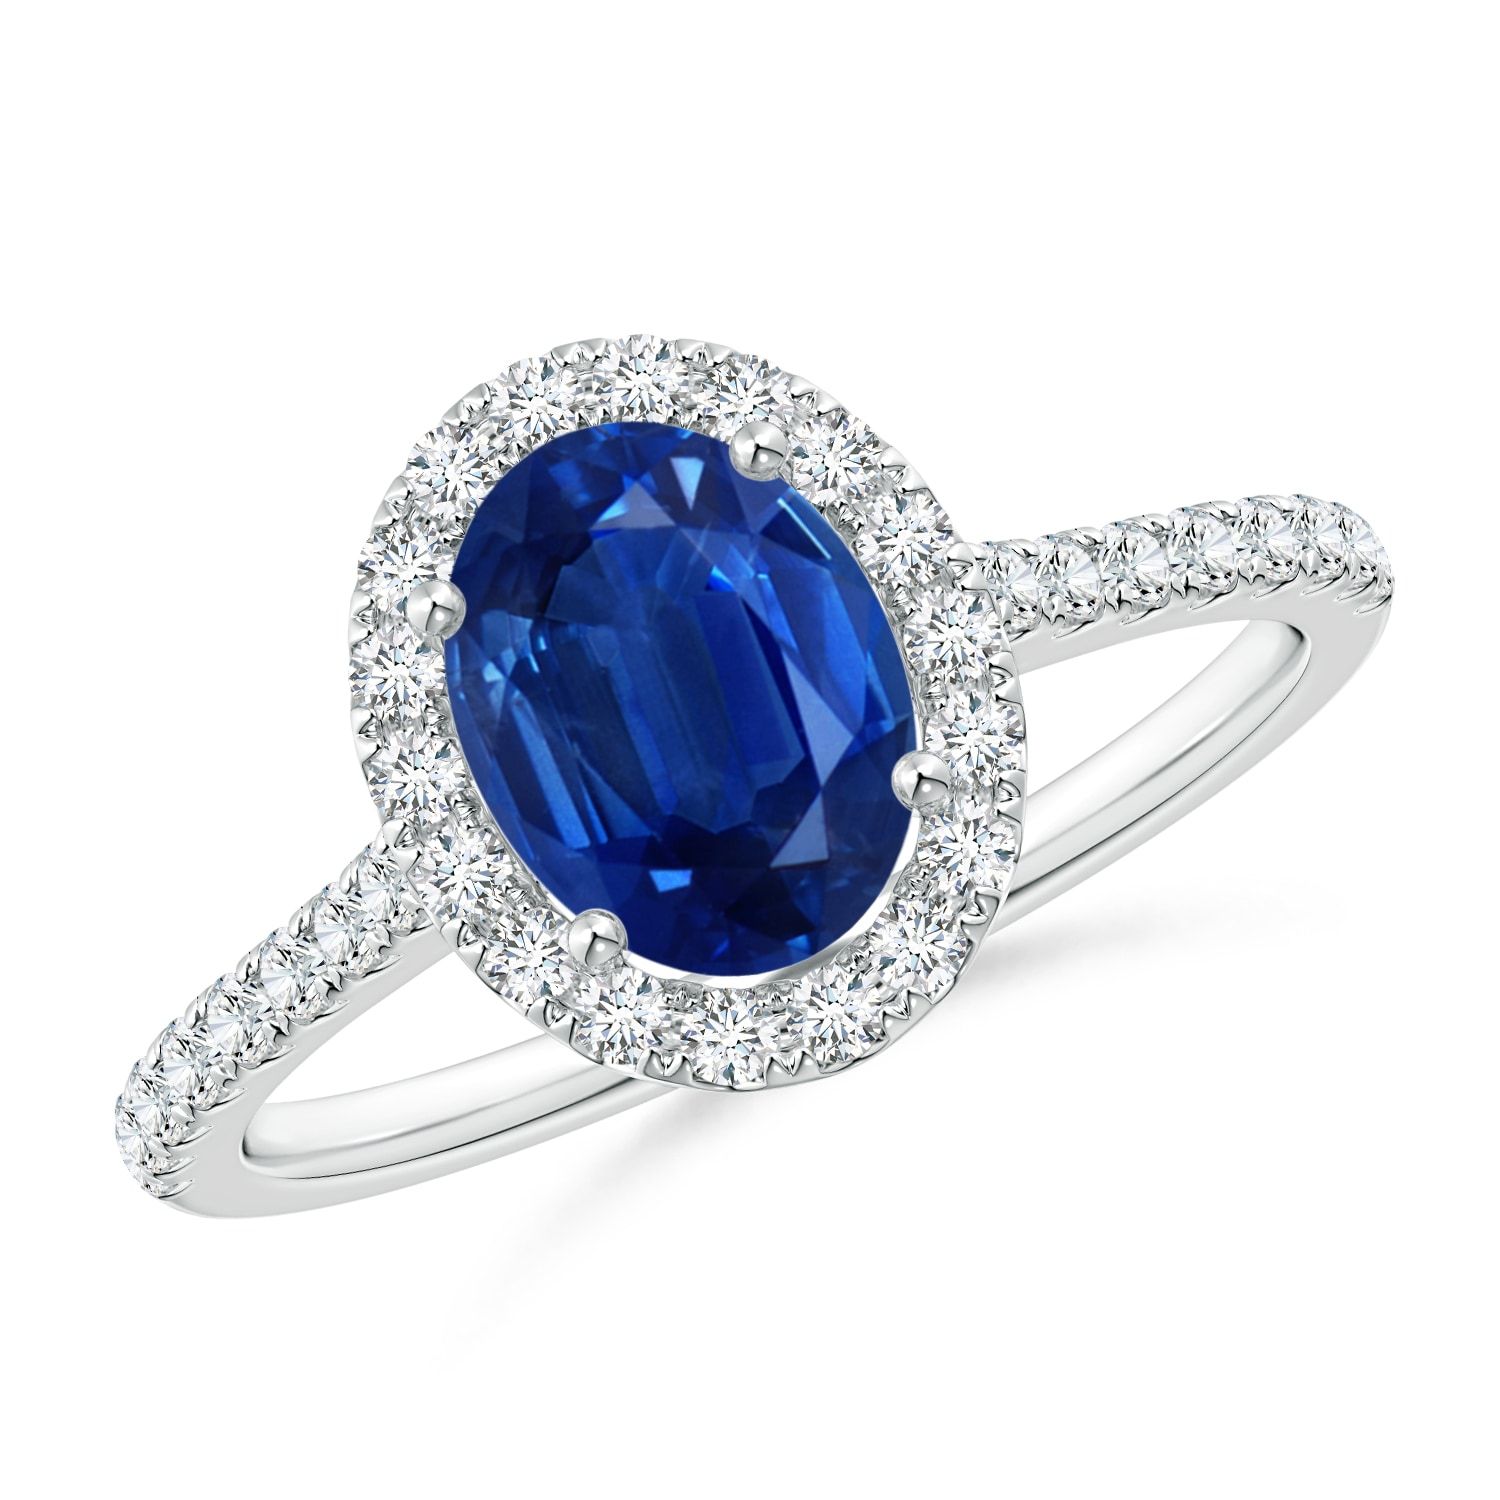 Oval Sapphire Halo Ring With Diamond Accents With 2017 Blue Square Sparkle Halo Rings (View 6 of 25)